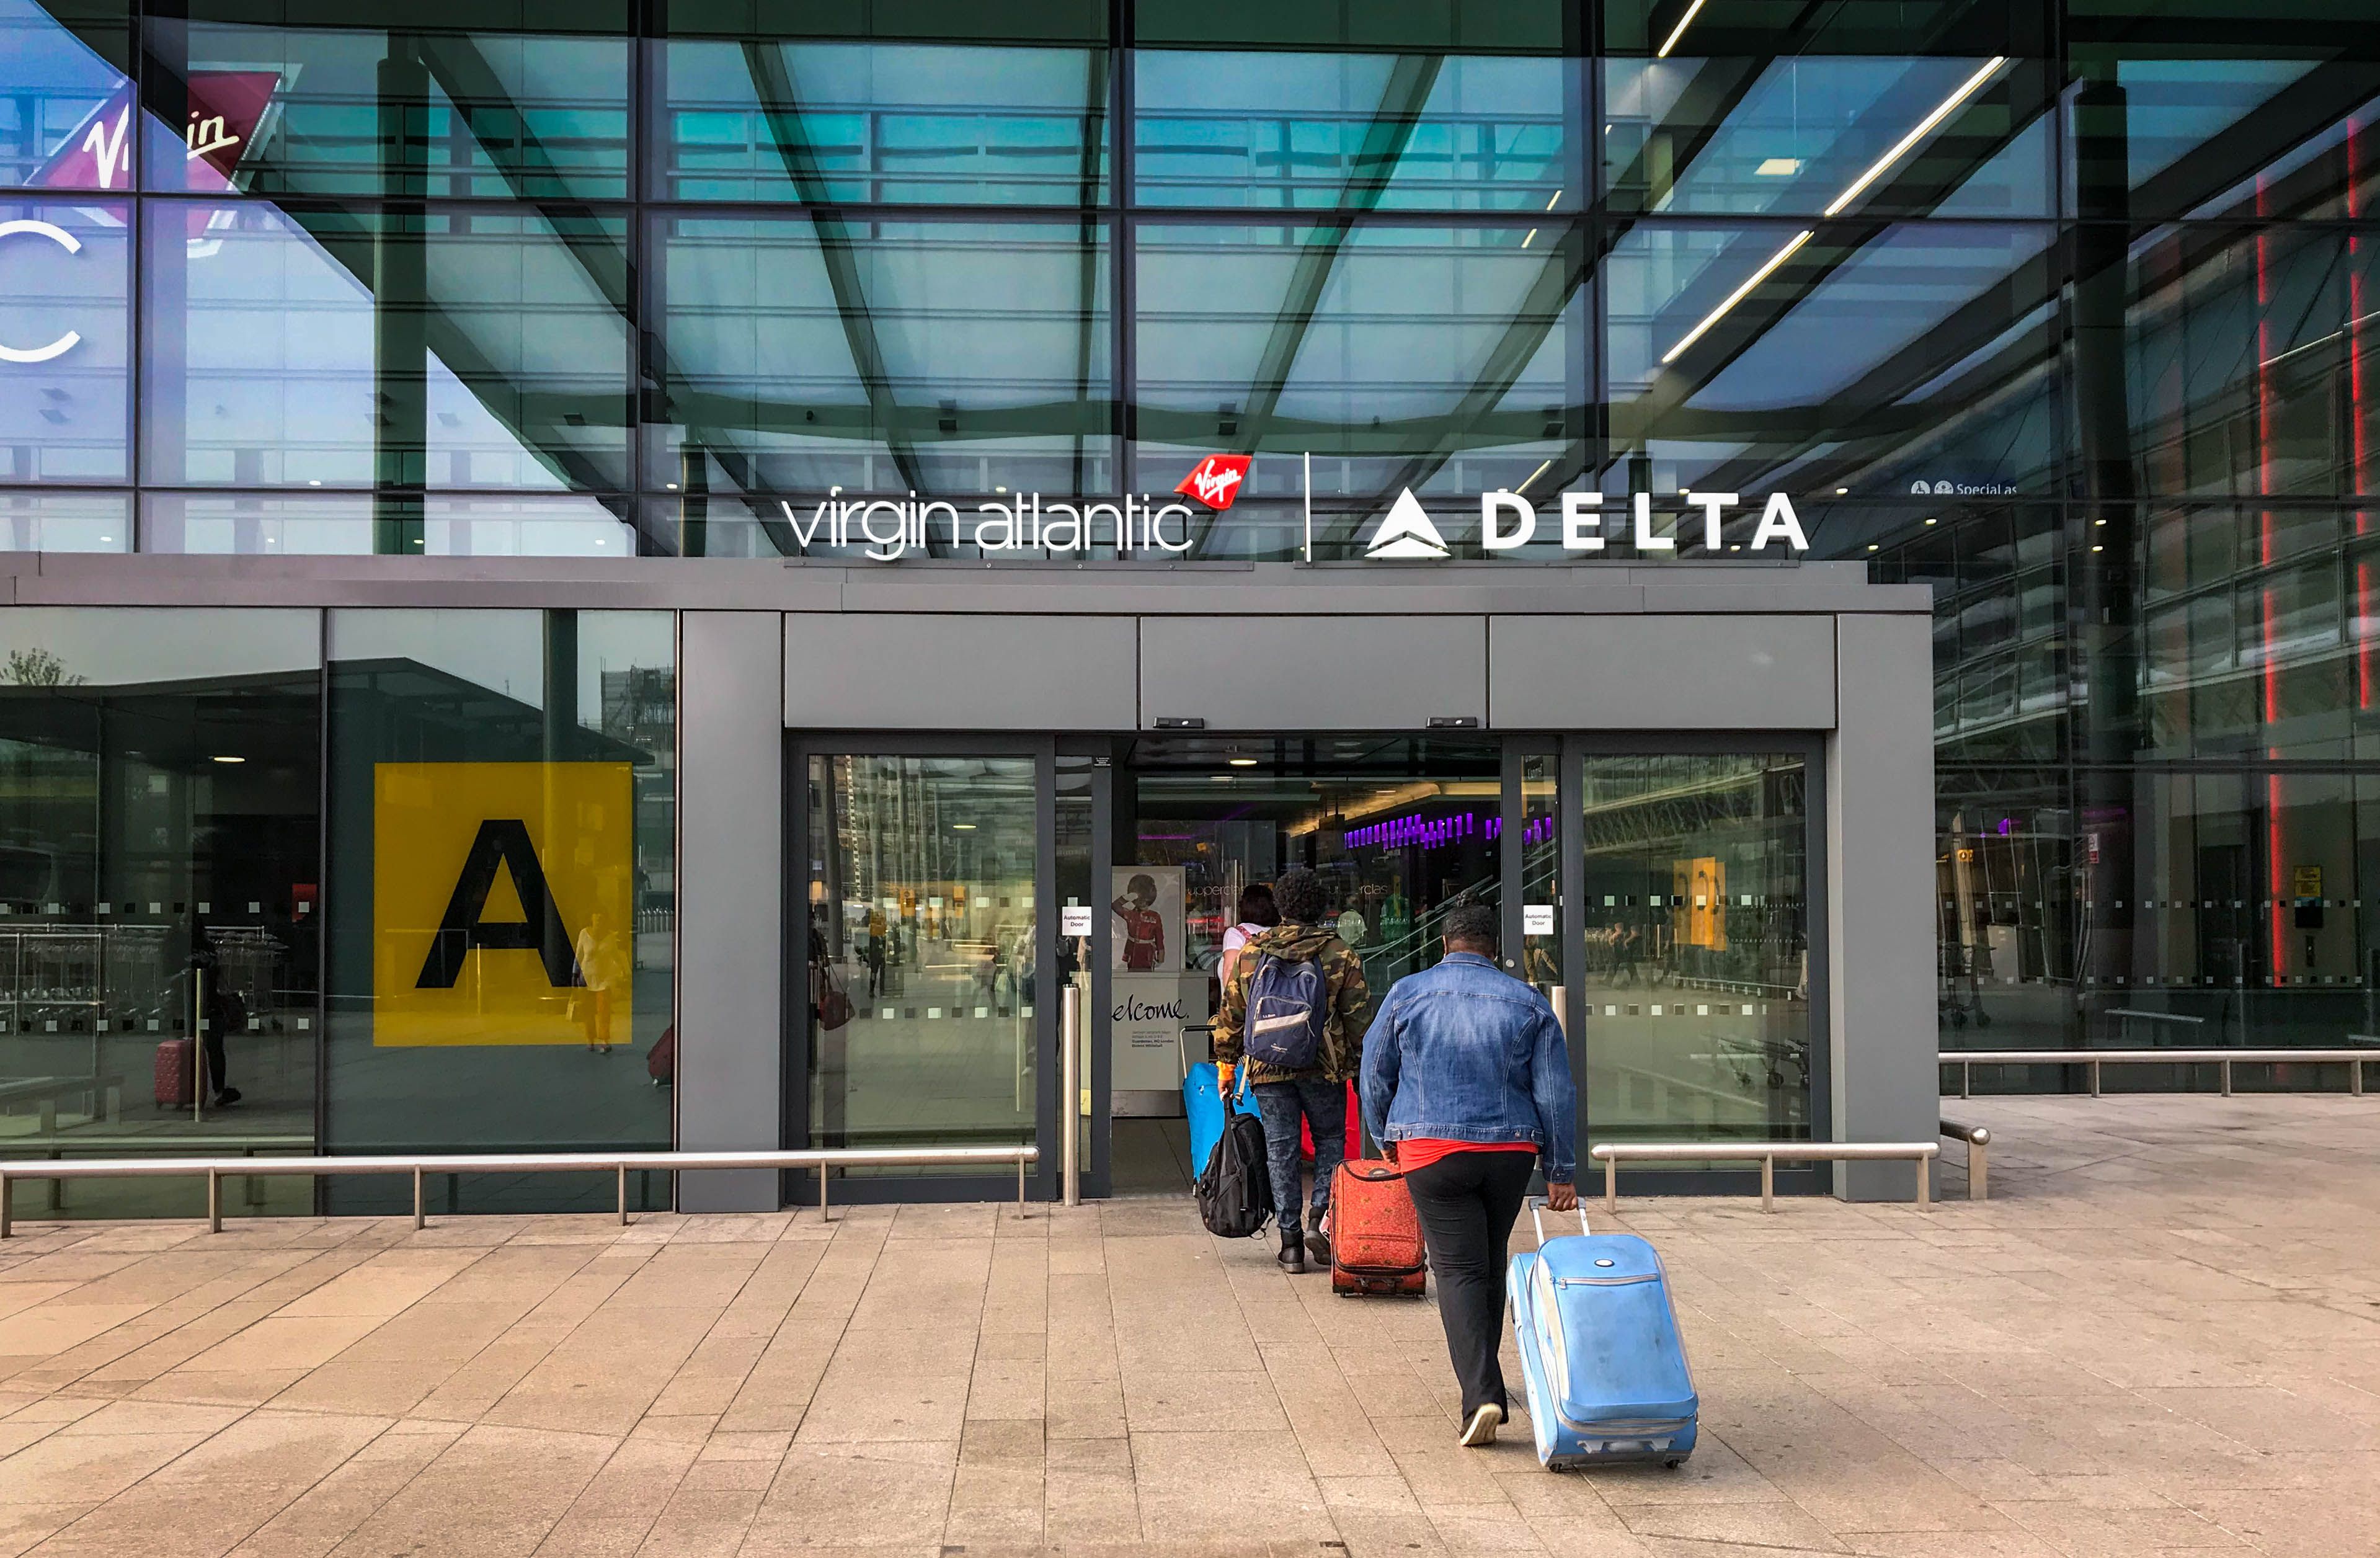 The Virgin Atlantic and Delta Check in area at London Heathrow Airport.